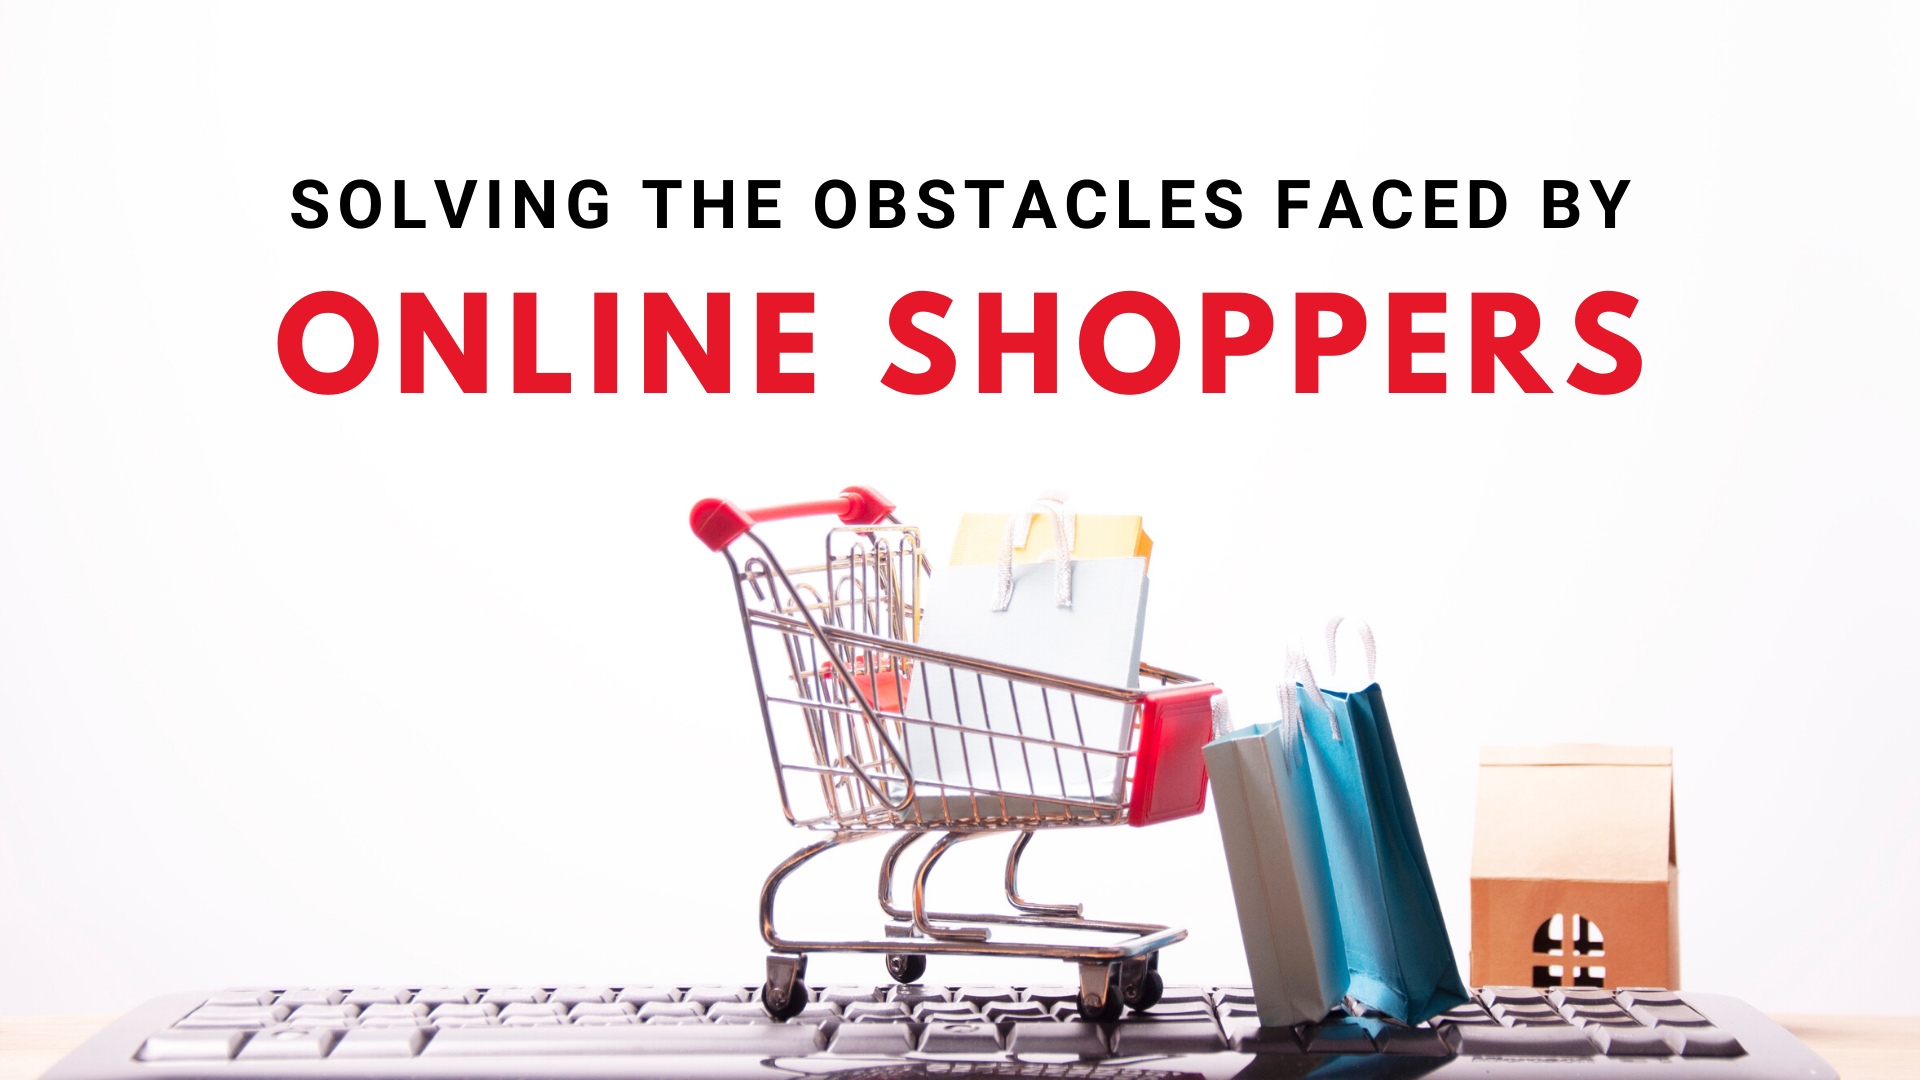 online shopping, ecommerce, solving problems, ecommerce problems, solving problems faced by online shoppers, common ecommerce issues, abandoned cart, online store strategy, online store customers, ecommerce customer tips, ecommerce customers, customer feedback